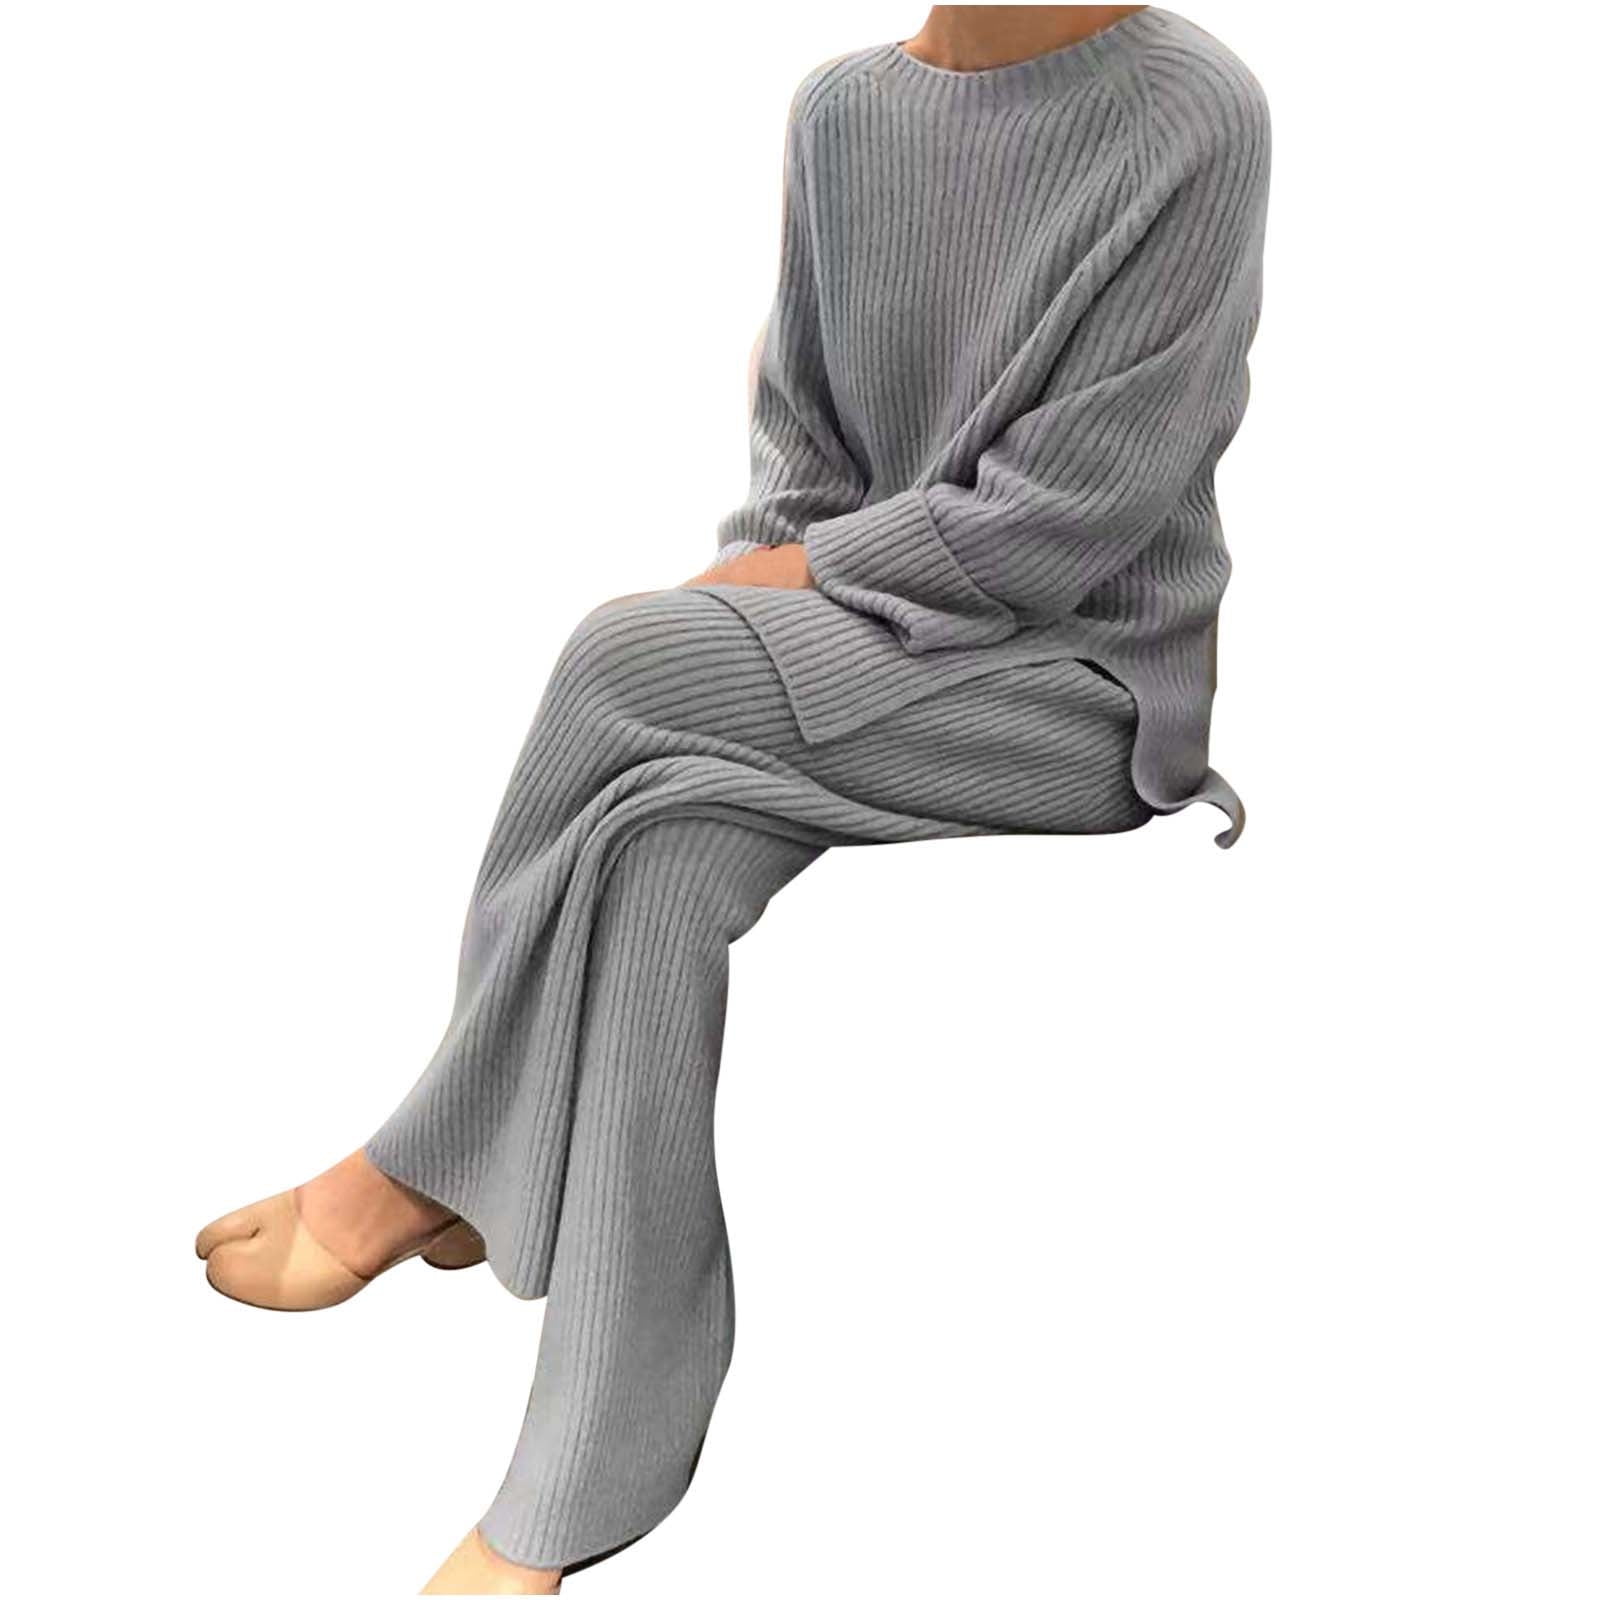 NEW Women's Casual Ribbed Knit 2 Piece Outfit Long Sleeve Sweater Pullover and Wide Leg Long Pants Sweater Set Fall Clothes - image 5 of 9